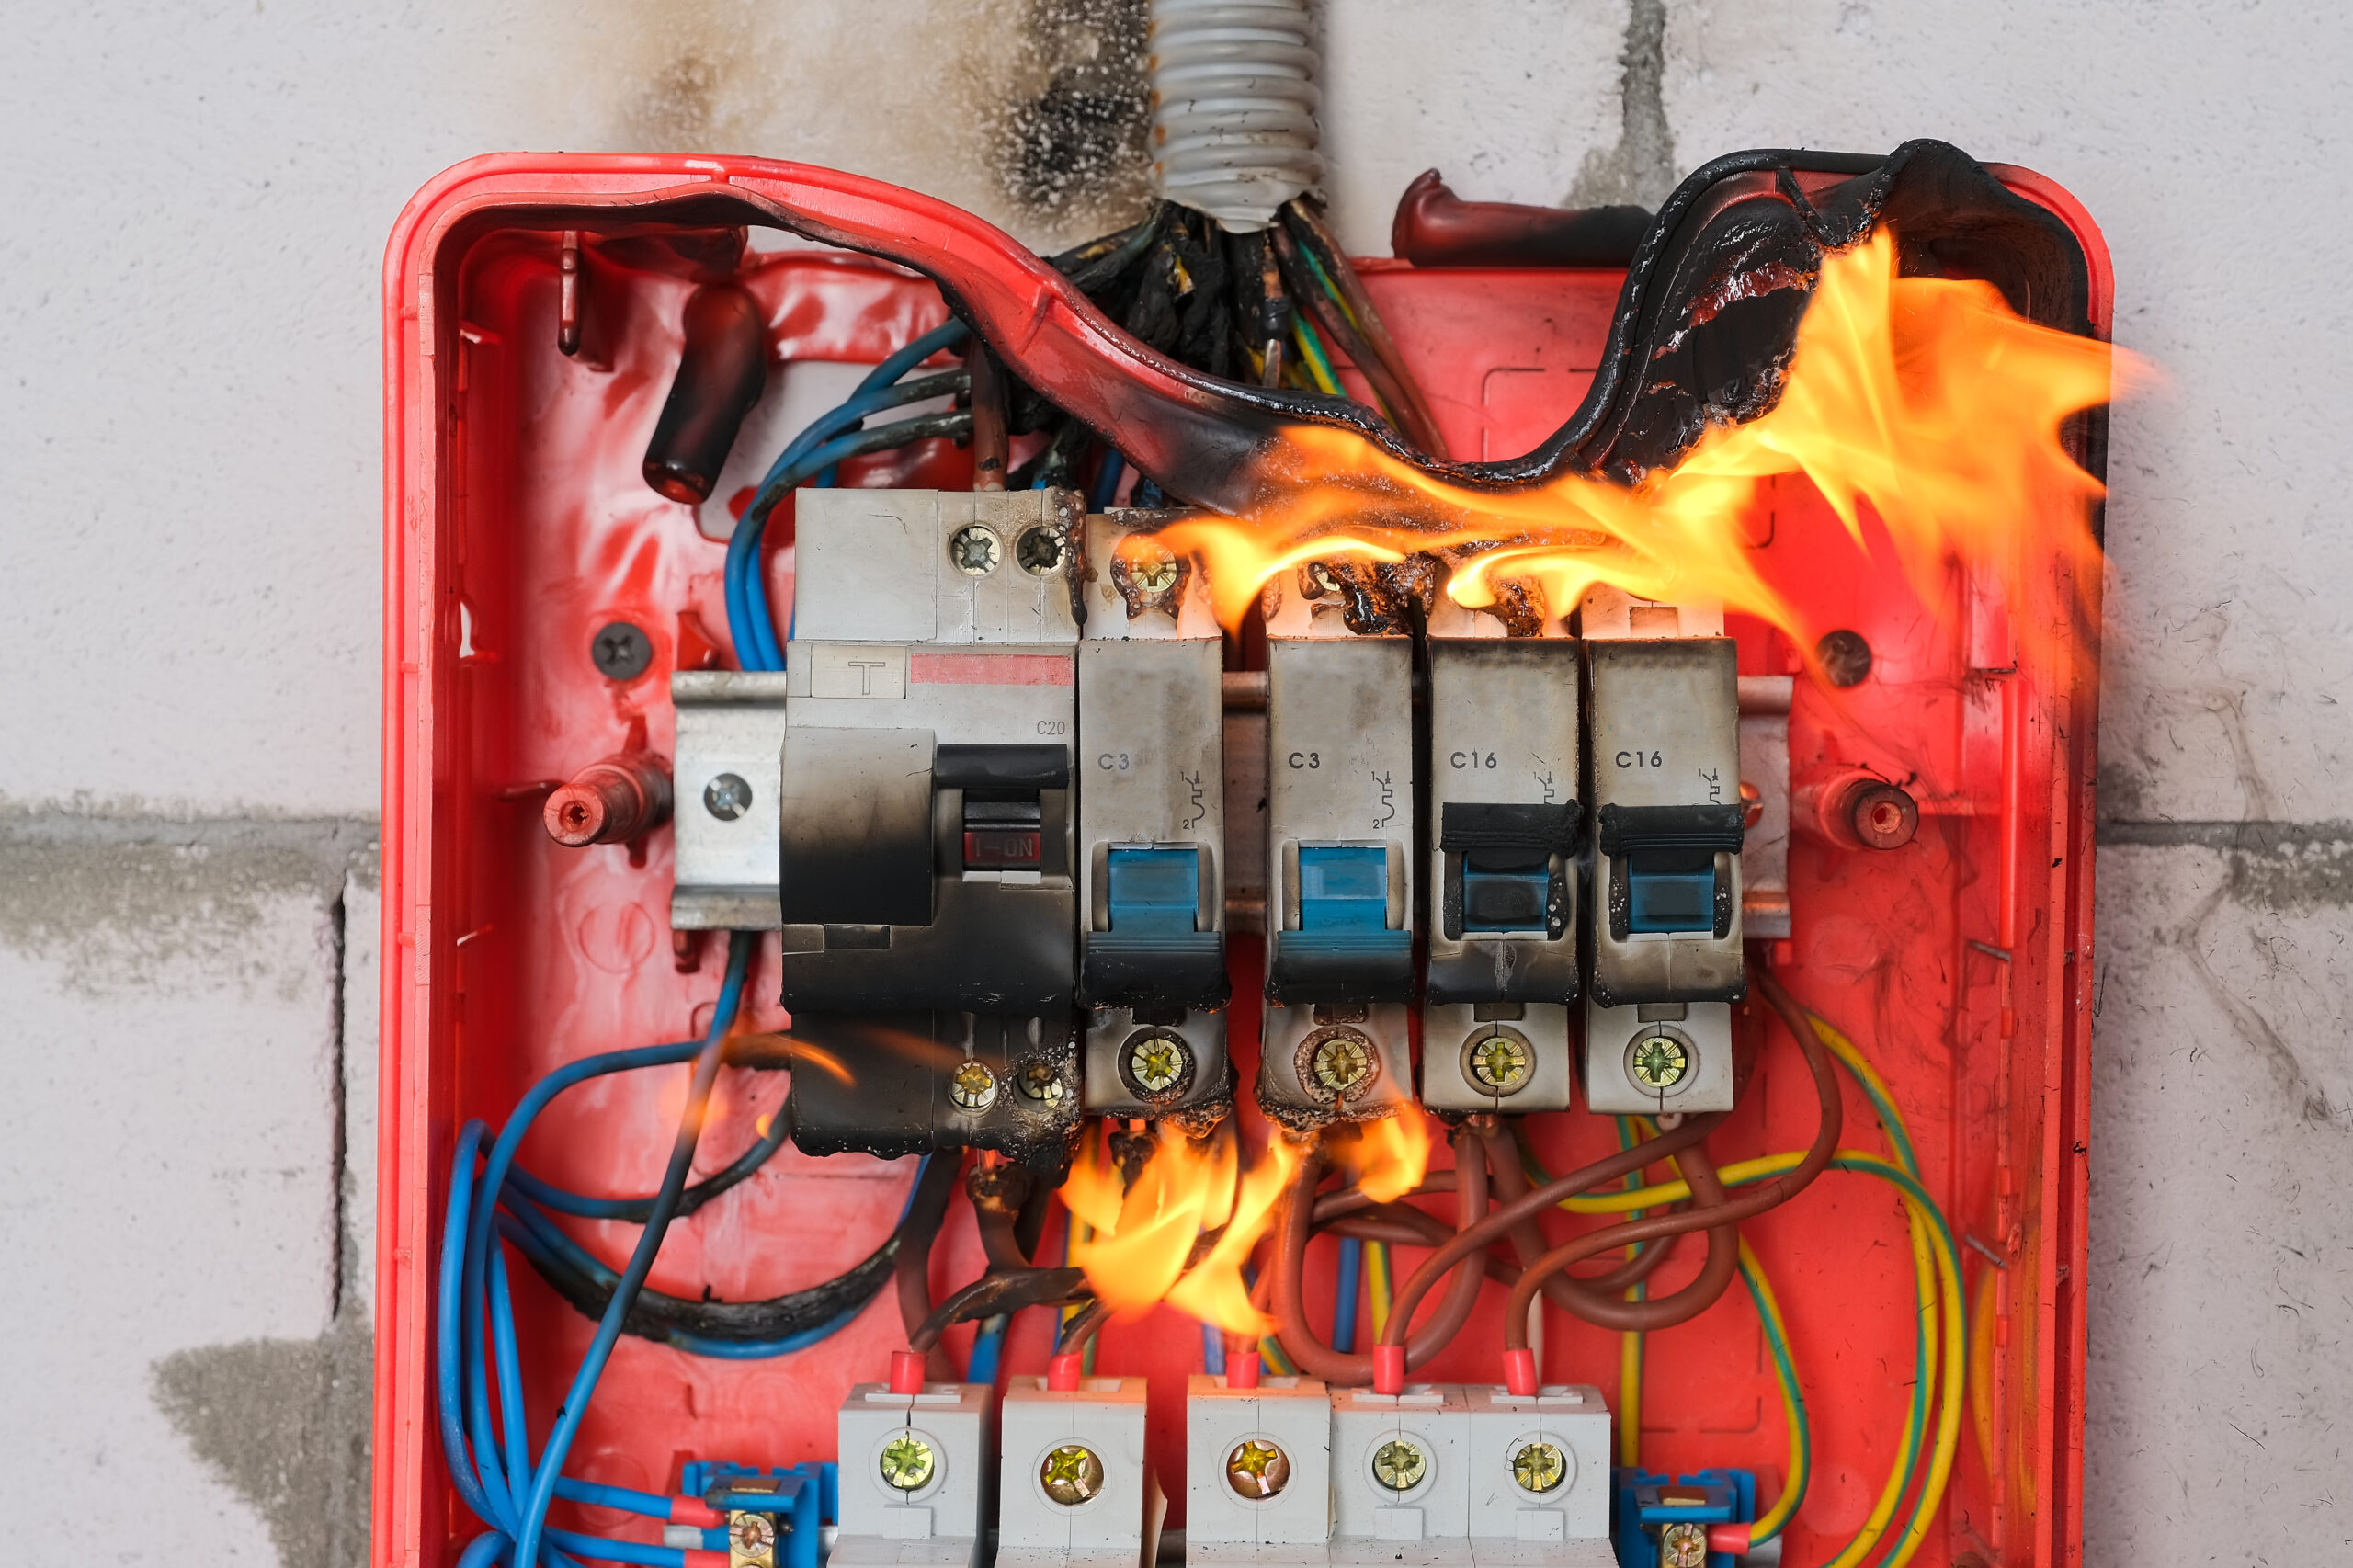 This is a picture for a blog about a residential home electrician.